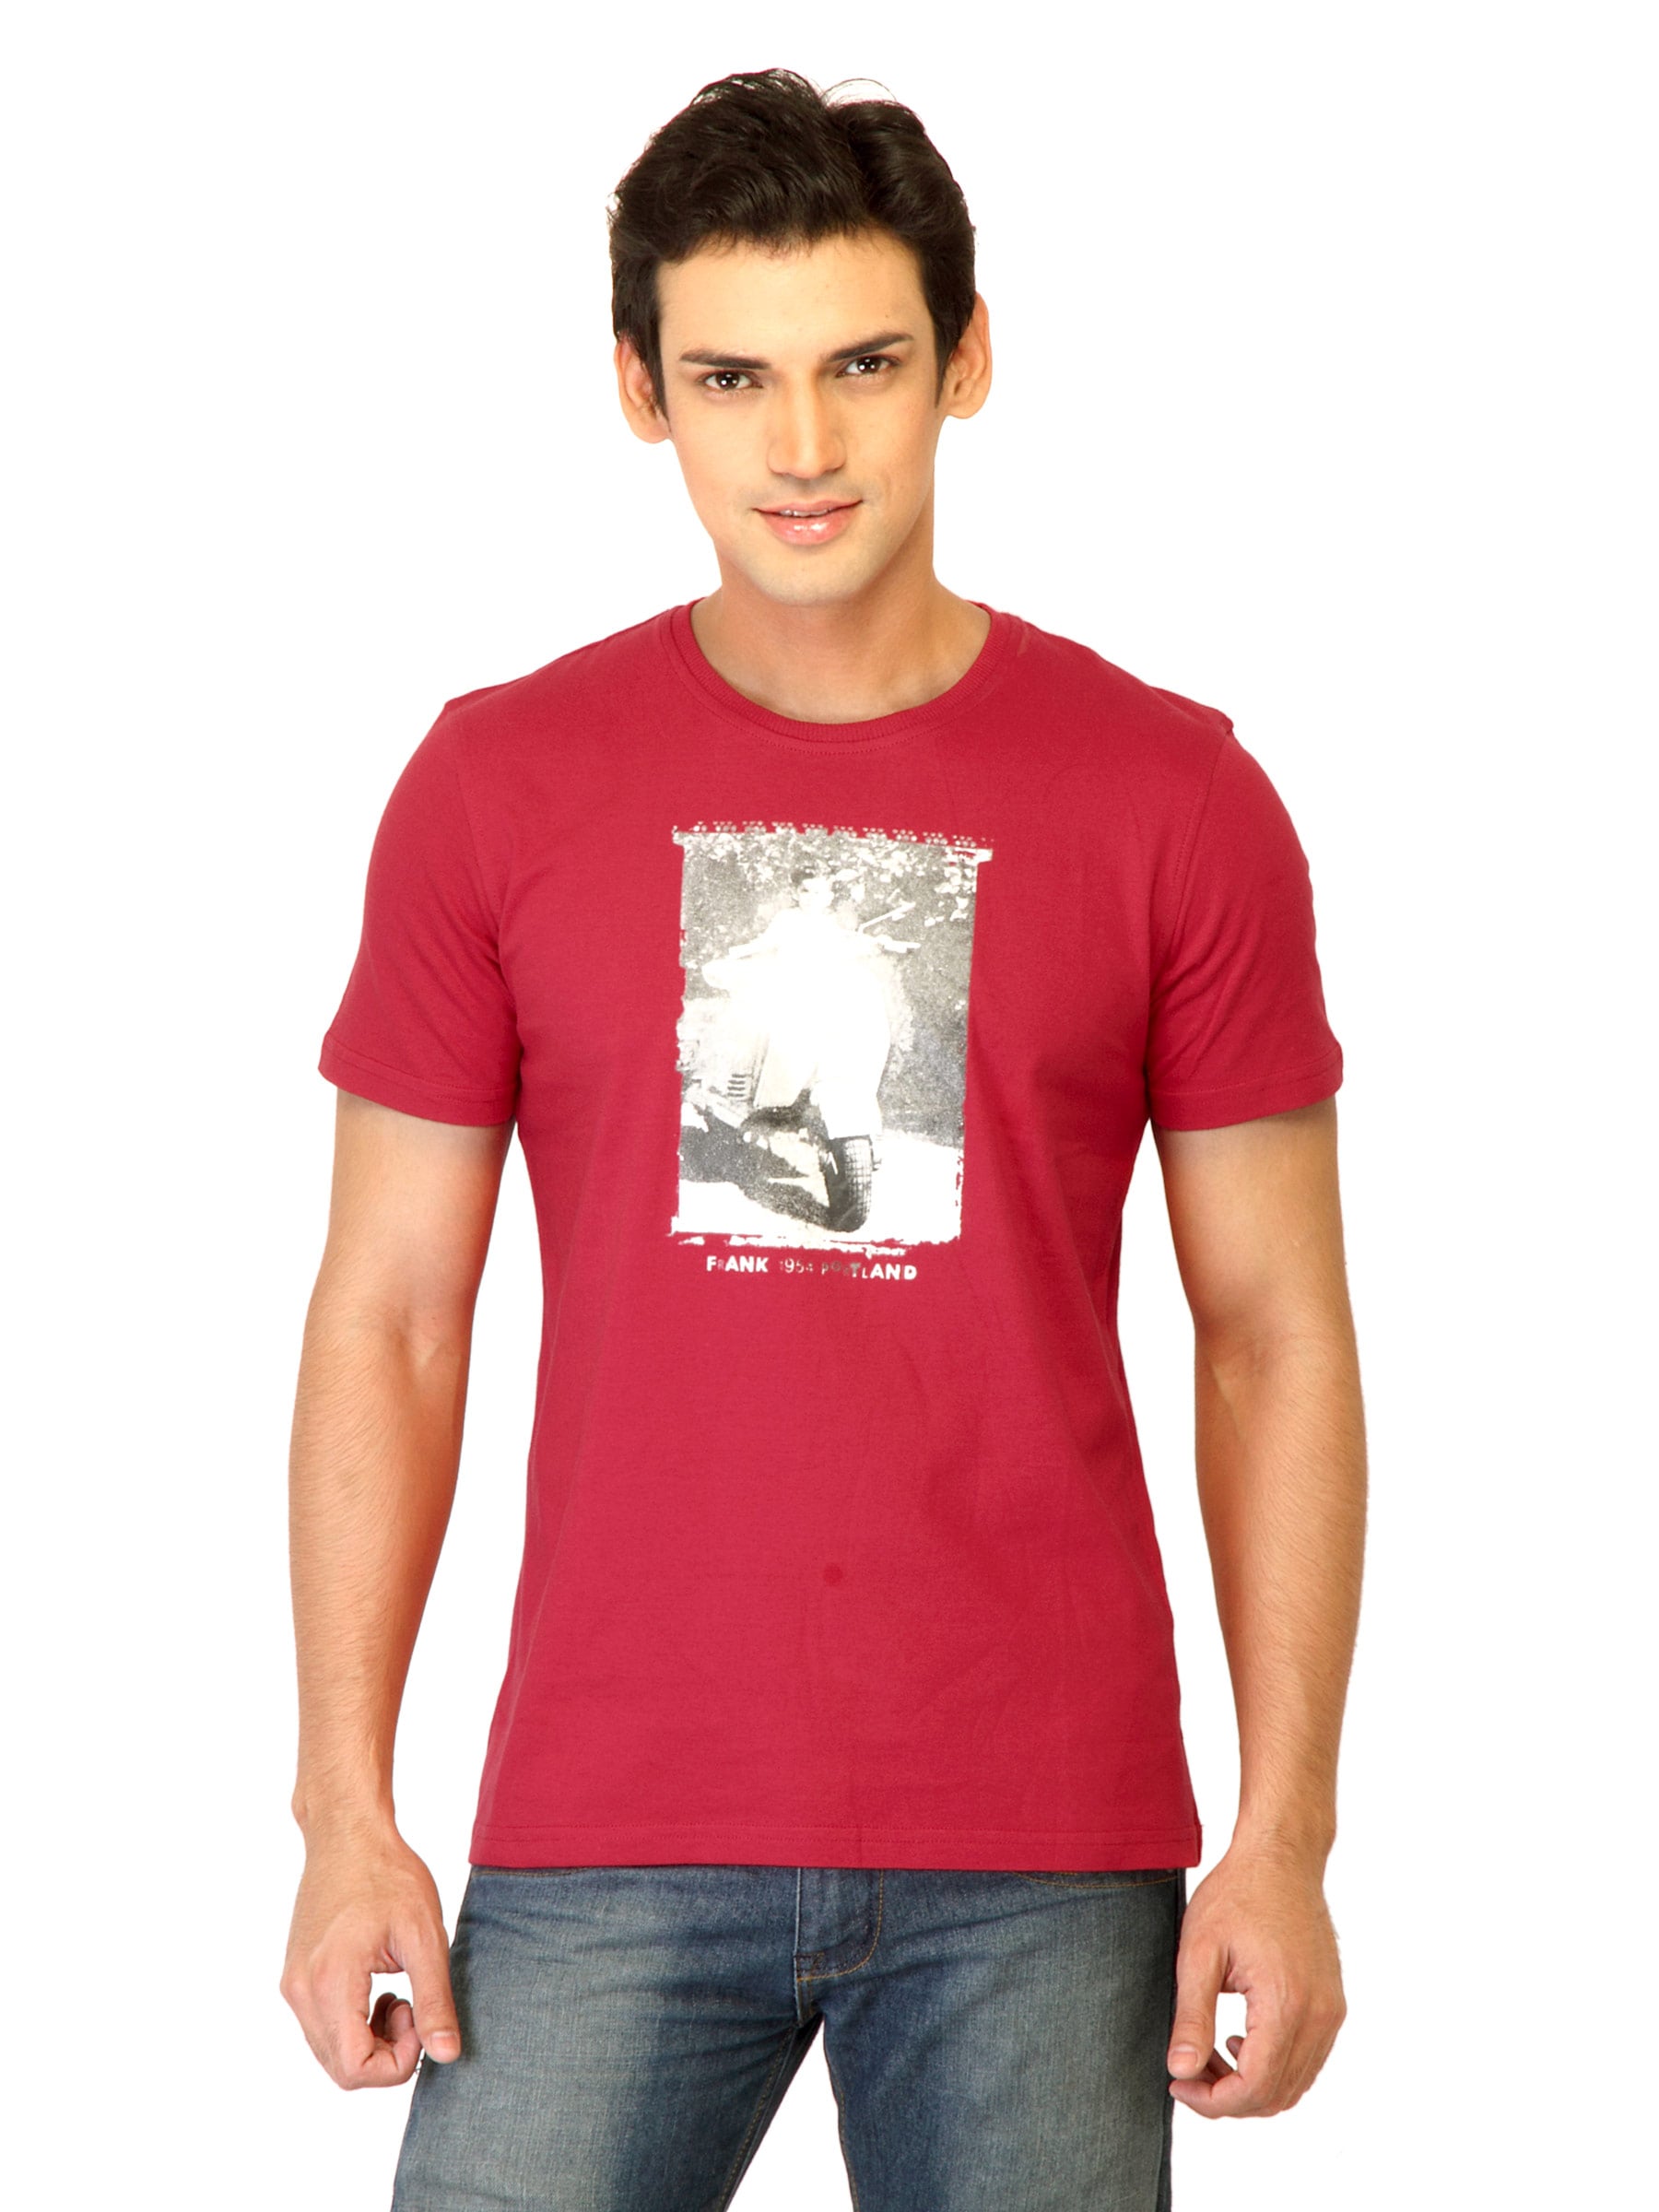 United Colors of Benetton Men Printed Red Tshirts